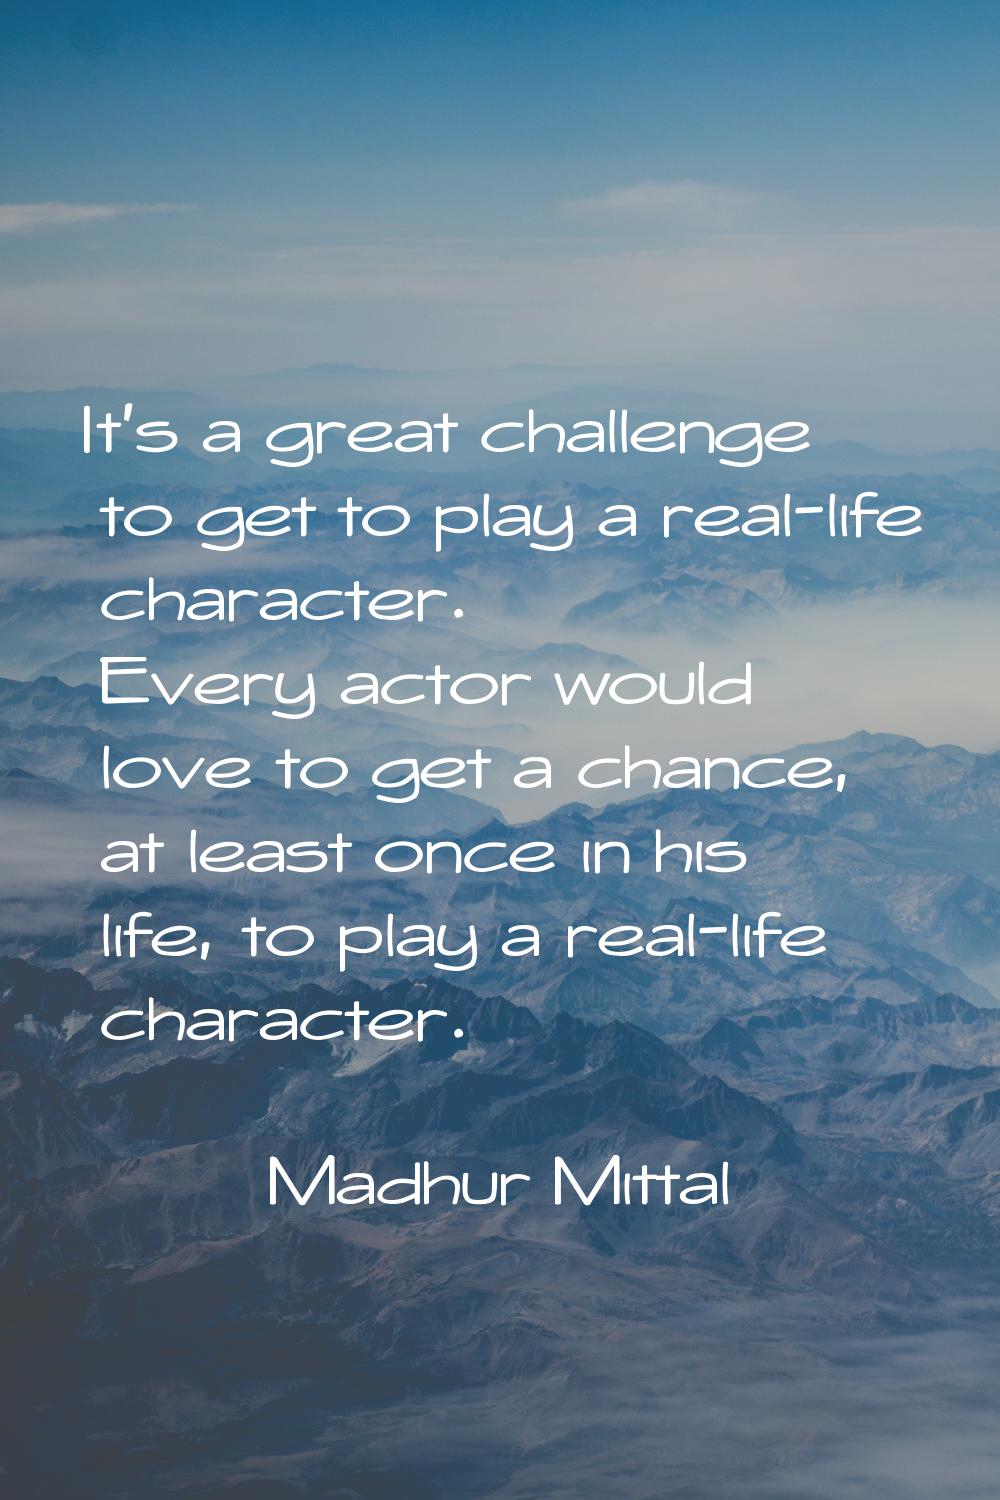 It's a great challenge to get to play a real-life character. Every actor would love to get a chance